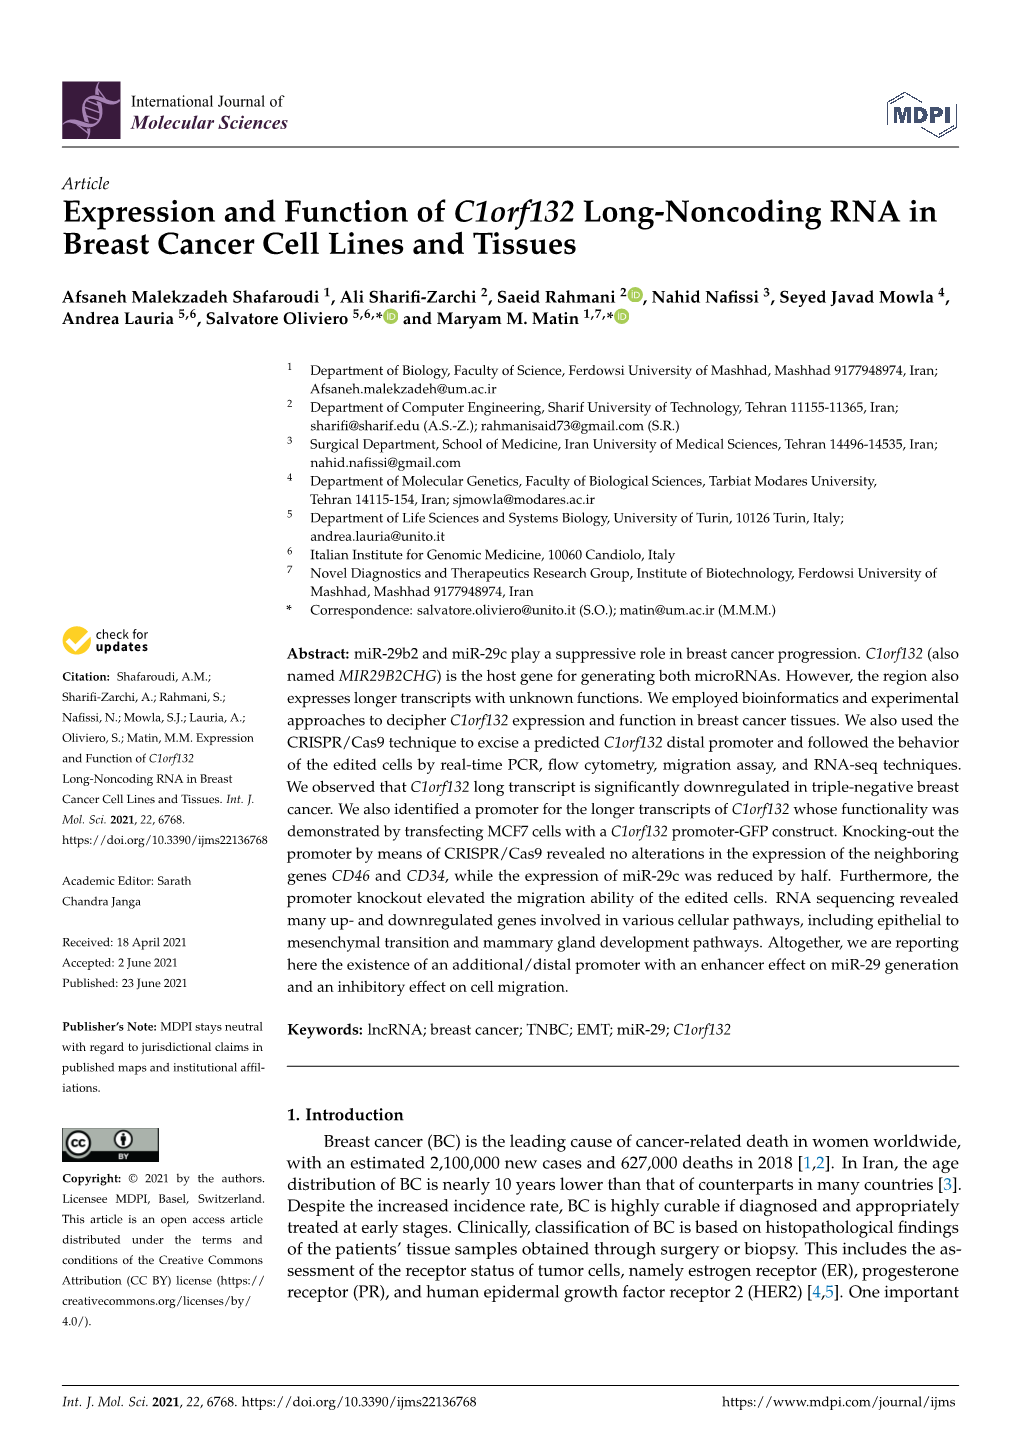 Expression and Function of C1orf132 Long-Noncoding RNA in Breast Cancer Cell Lines and Tissues